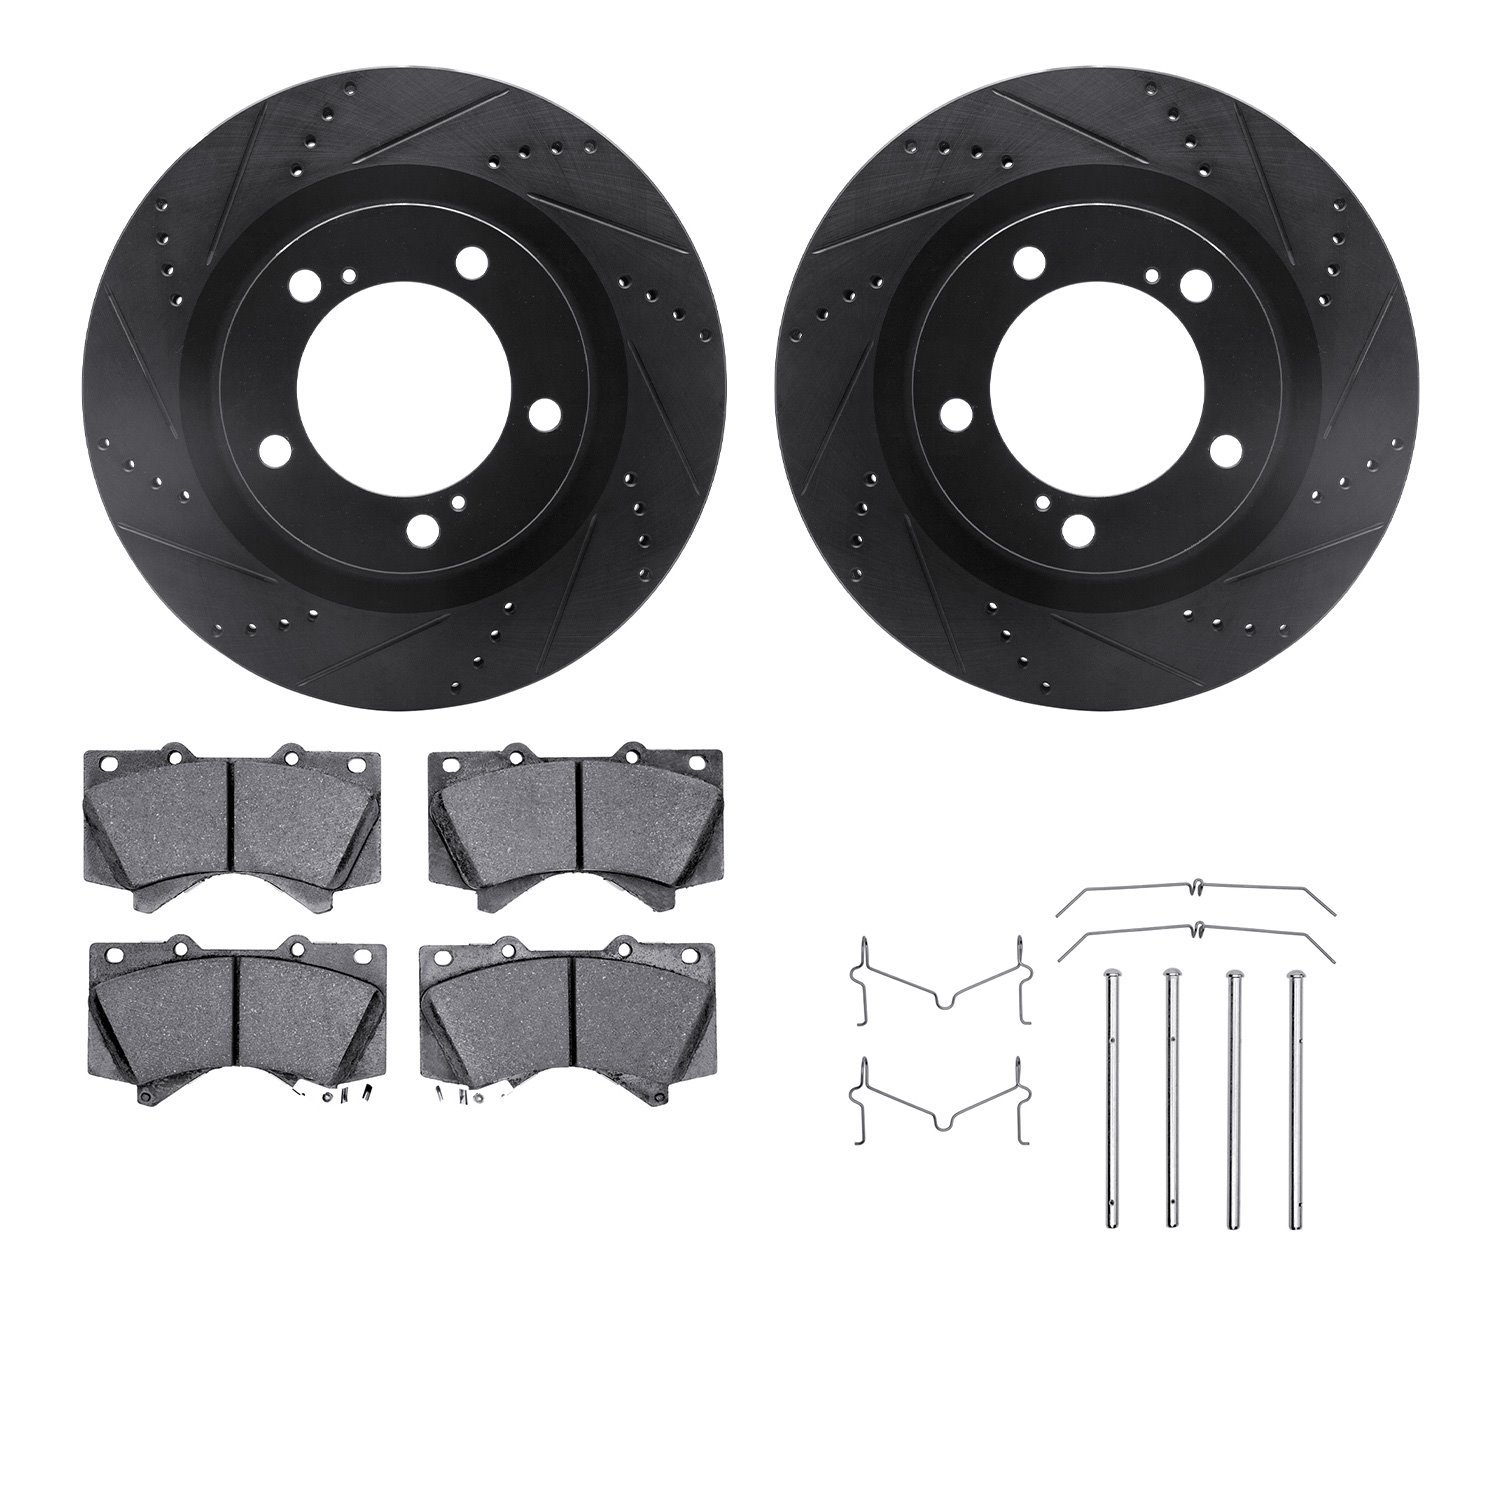 8412-76019 Drilled/Slotted Brake Rotors with Ultimate-Duty Brake Pads Kit & Hardware [Black], Fits Select Lexus/Toyota/Scion, Po